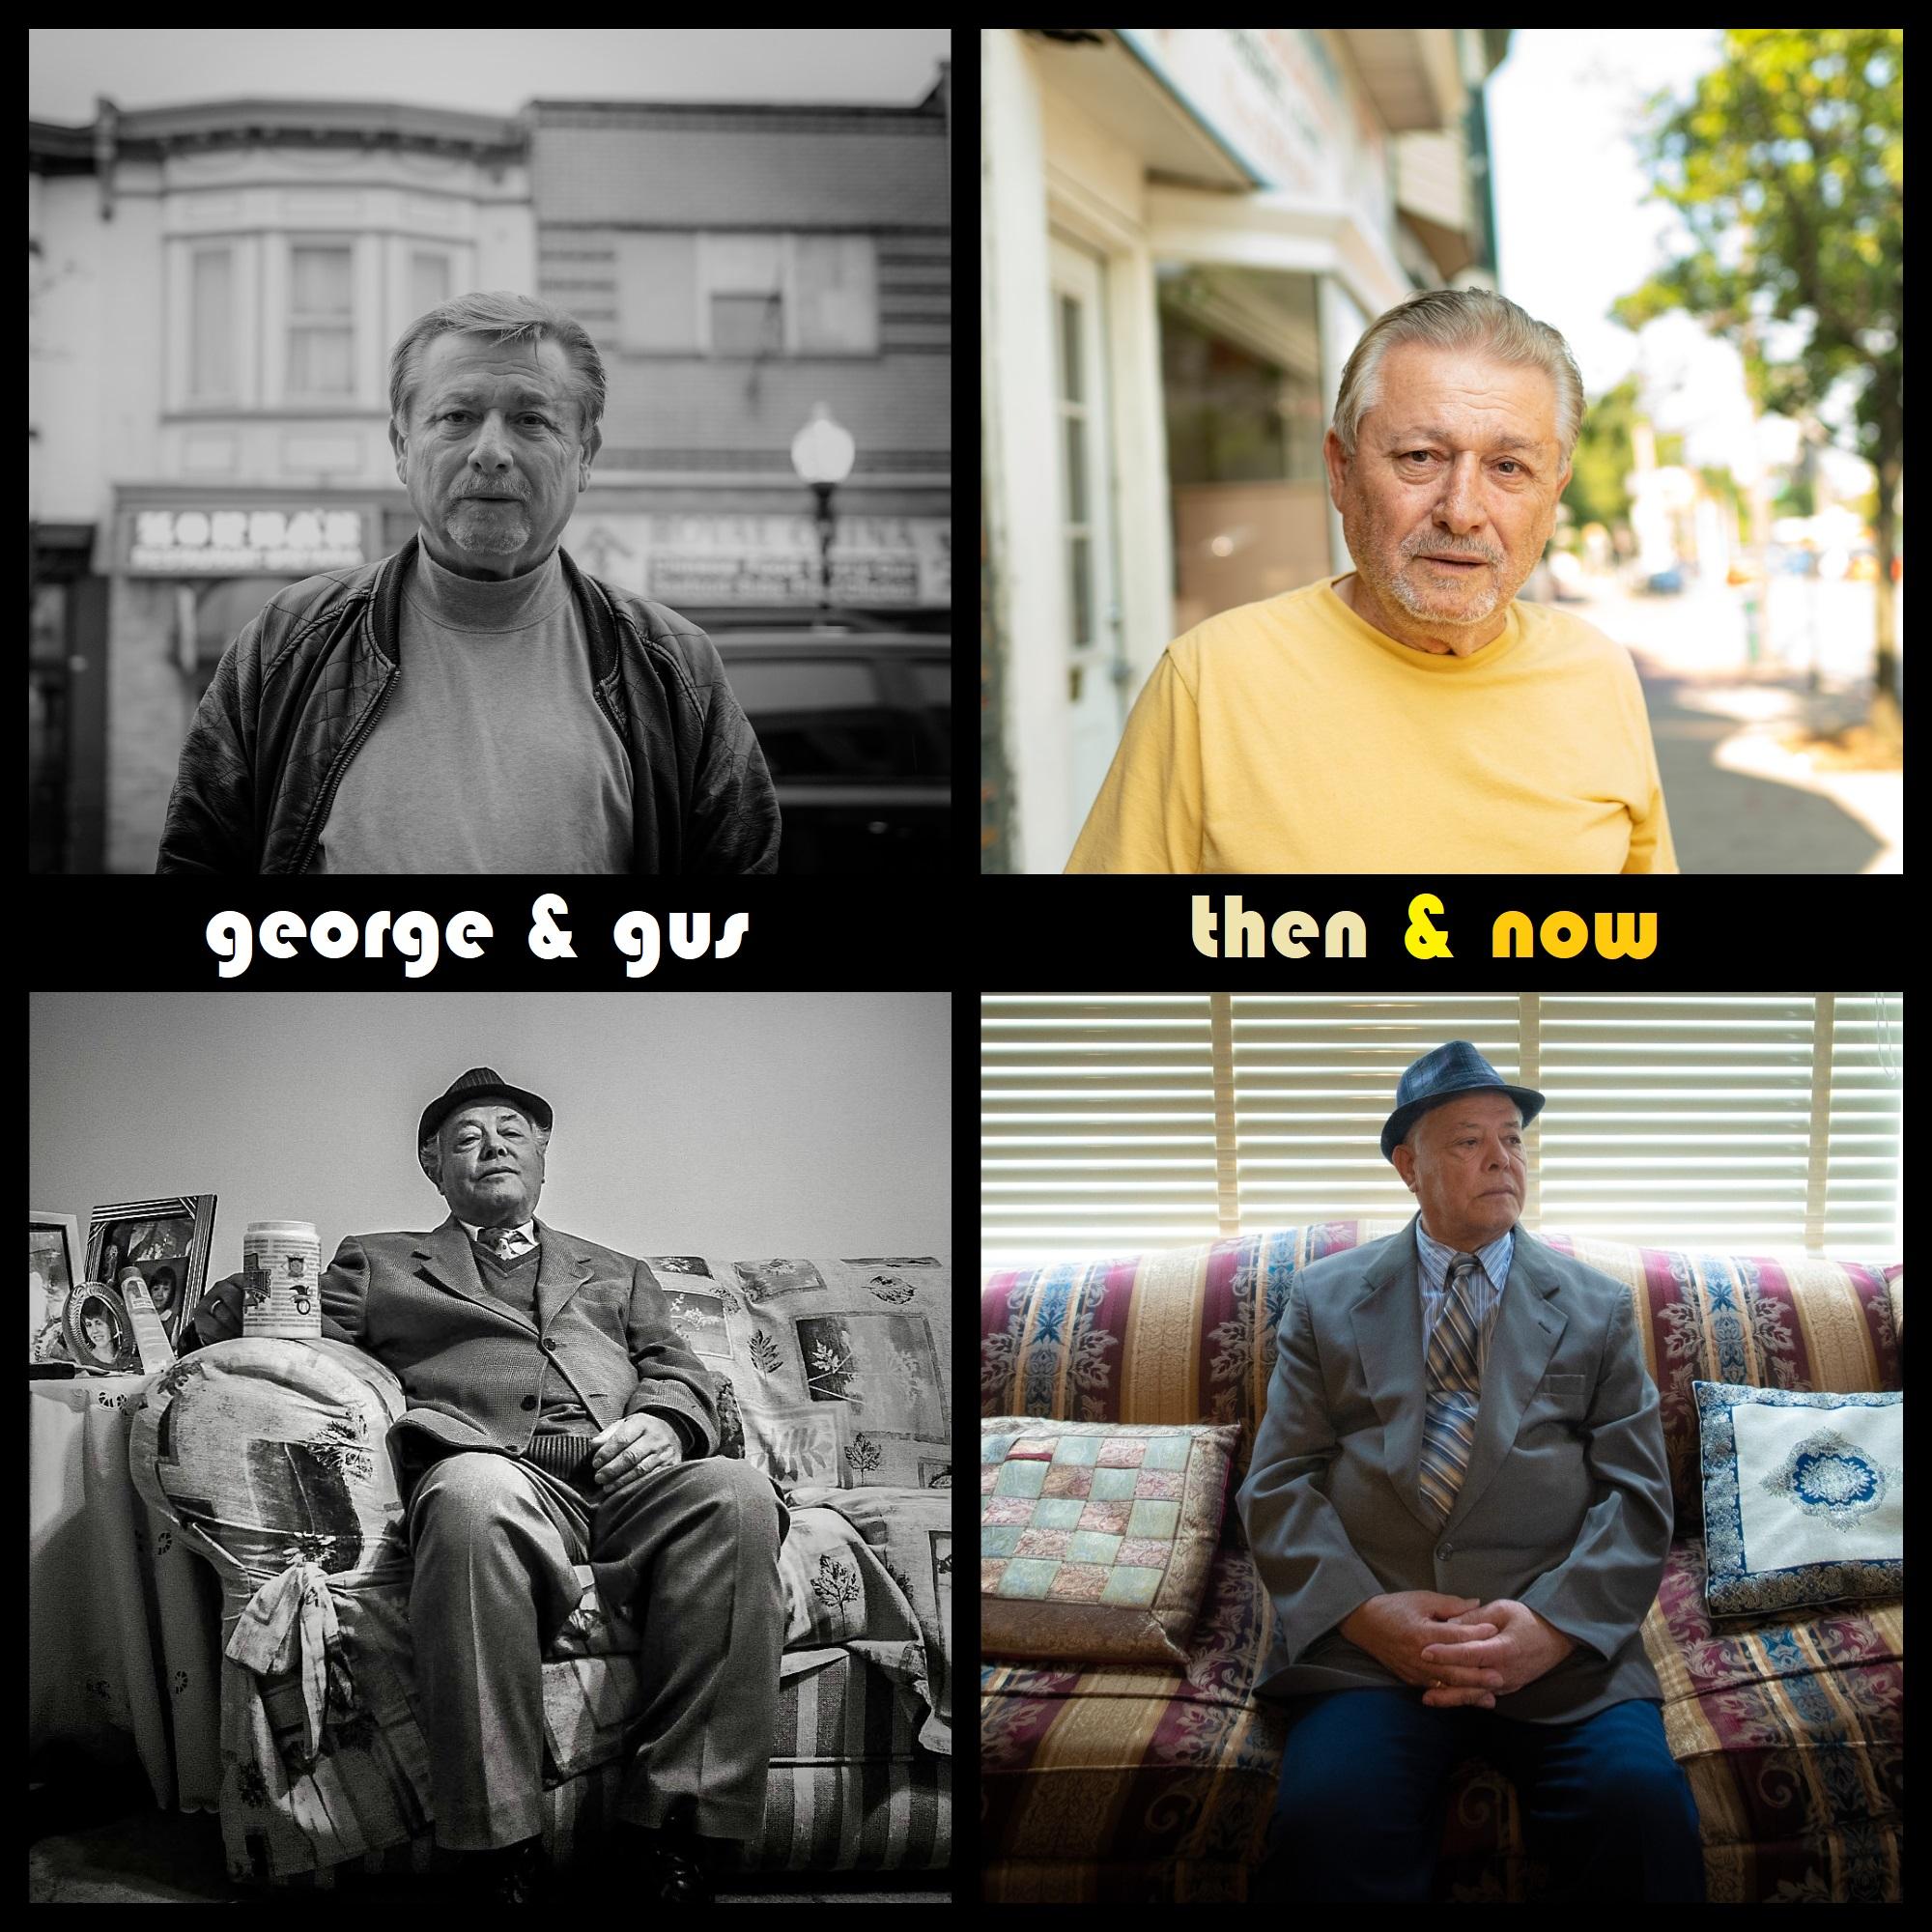 Thumbnail for "George & Gus, Then & Now".